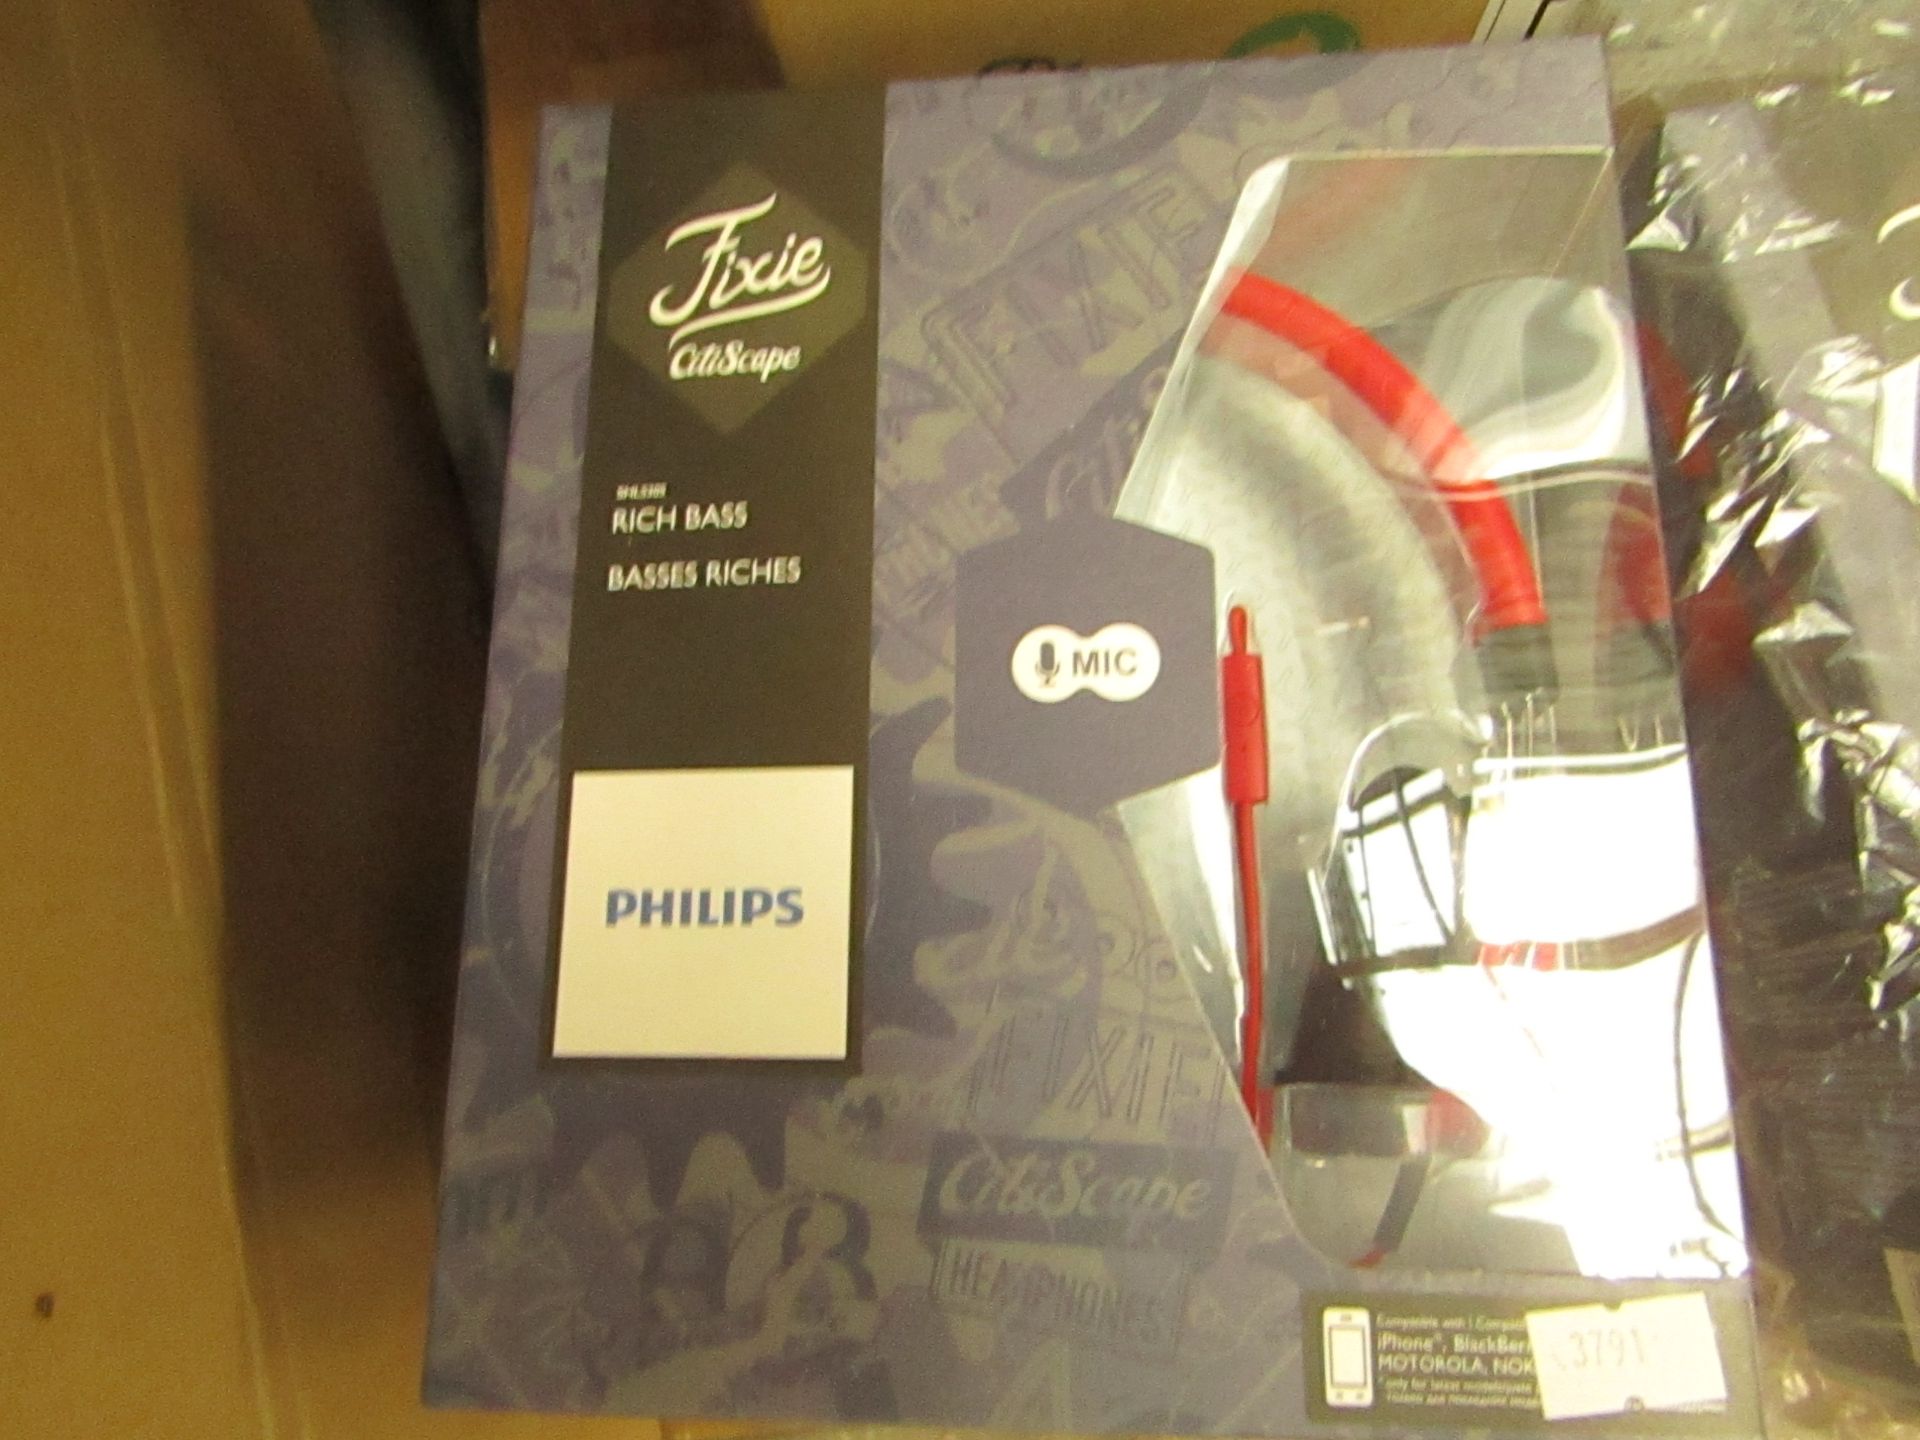 Phillips Fixie Citi Scape Rich Base Headphones, new and boxed